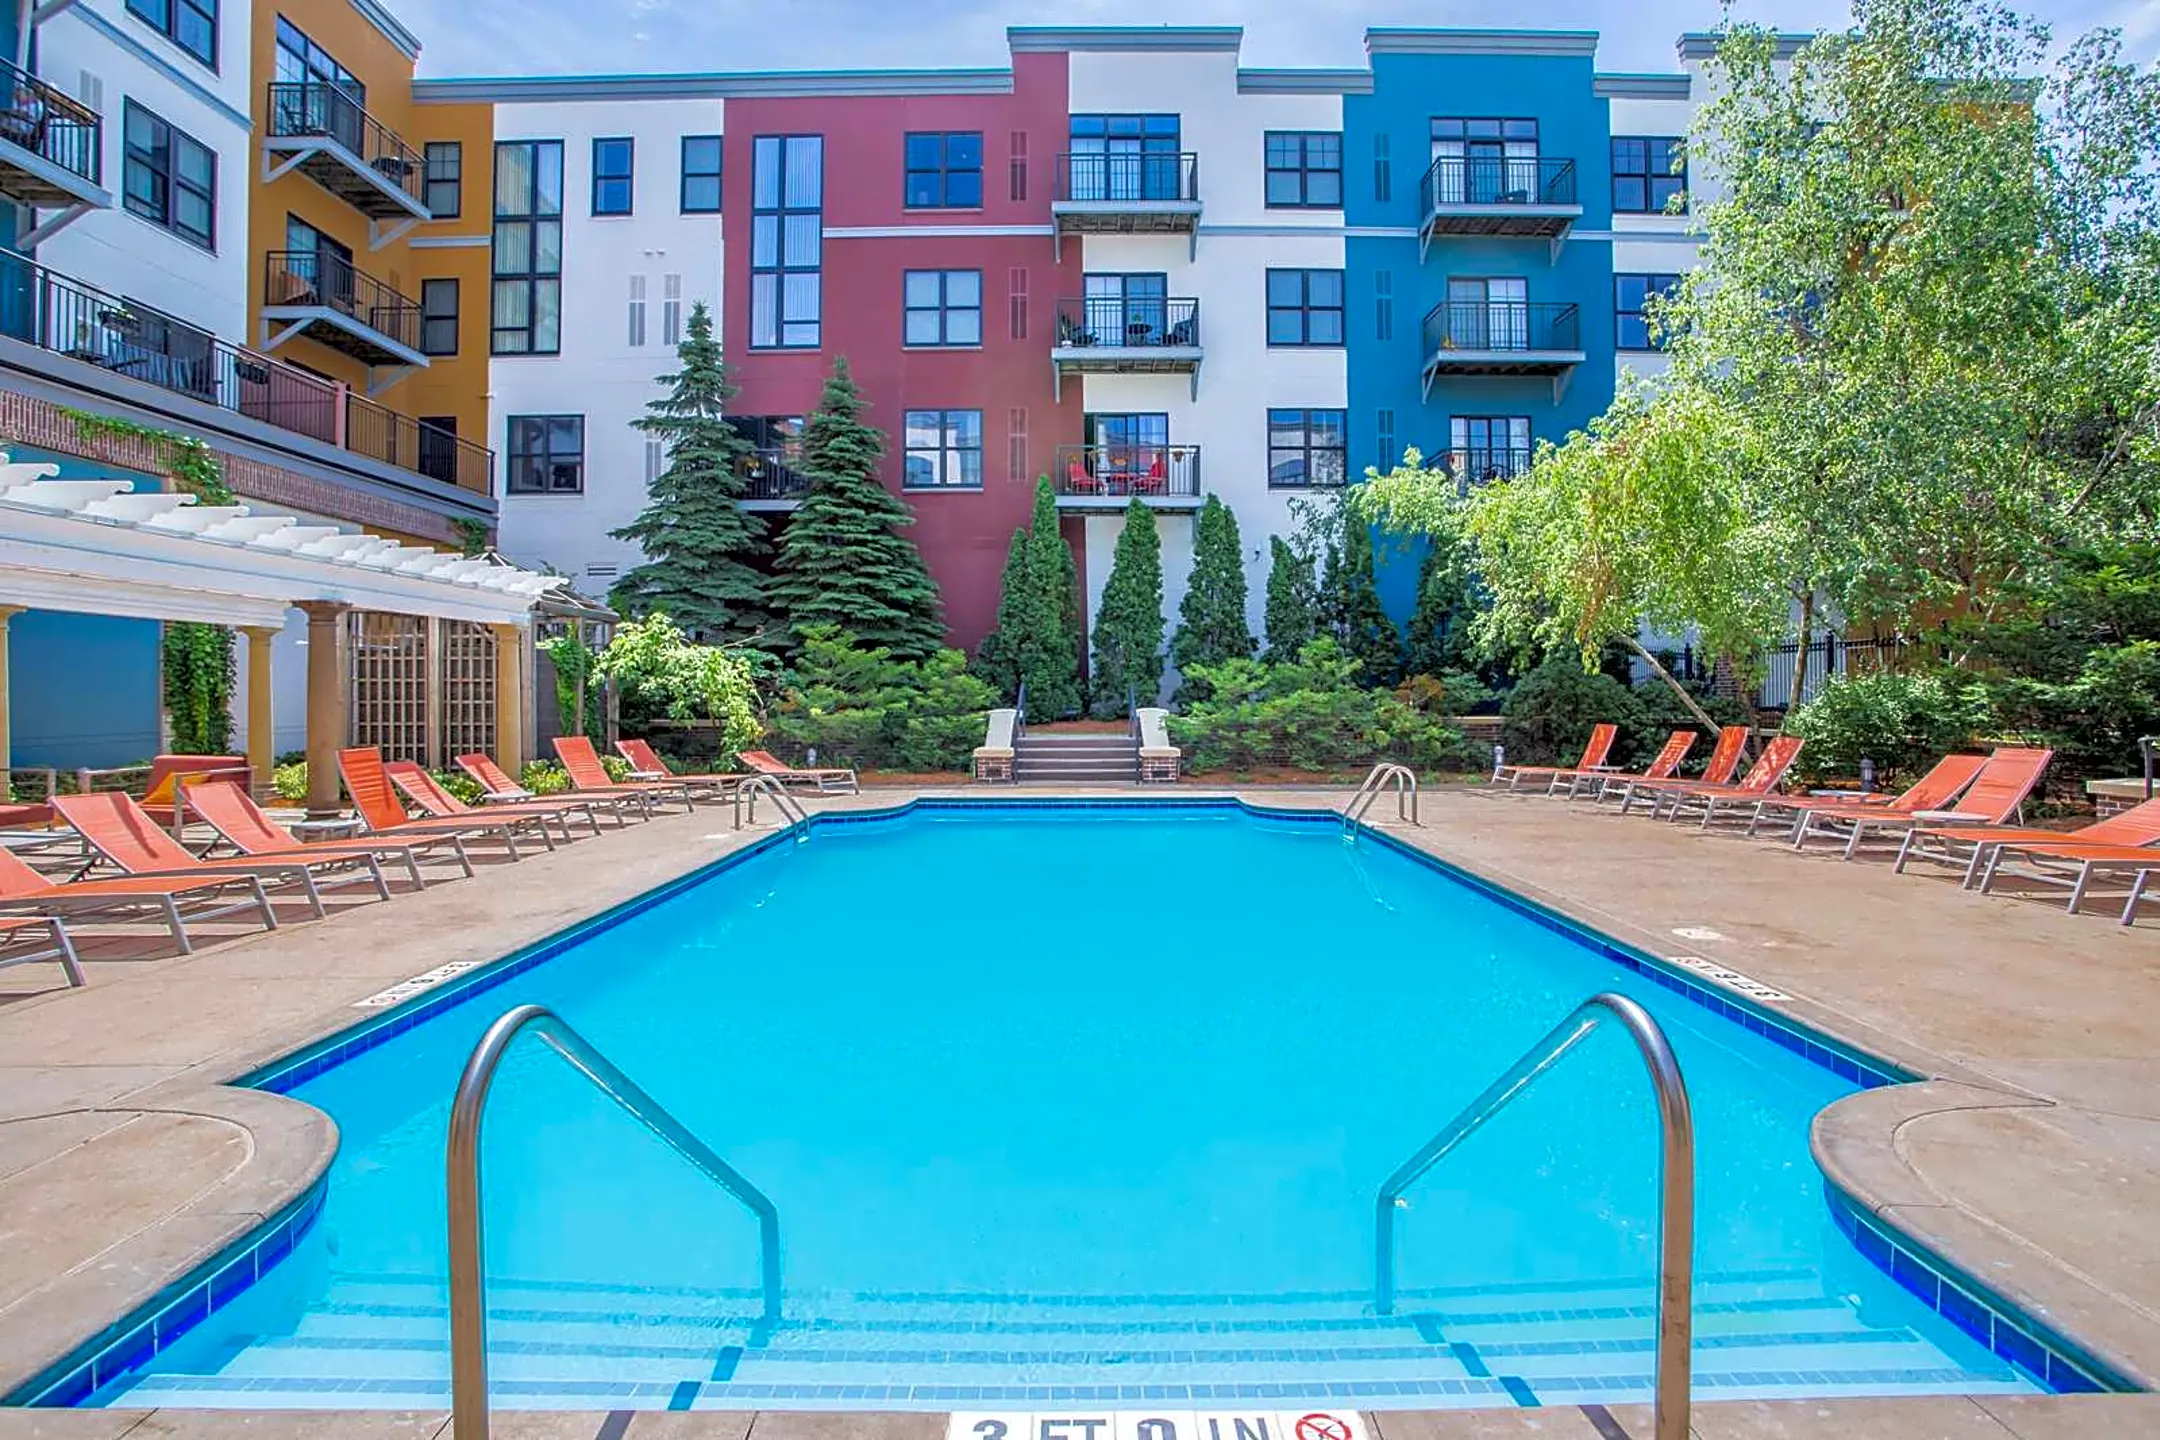 Pool - Excelsior And Grand - Saint Louis Park, MN